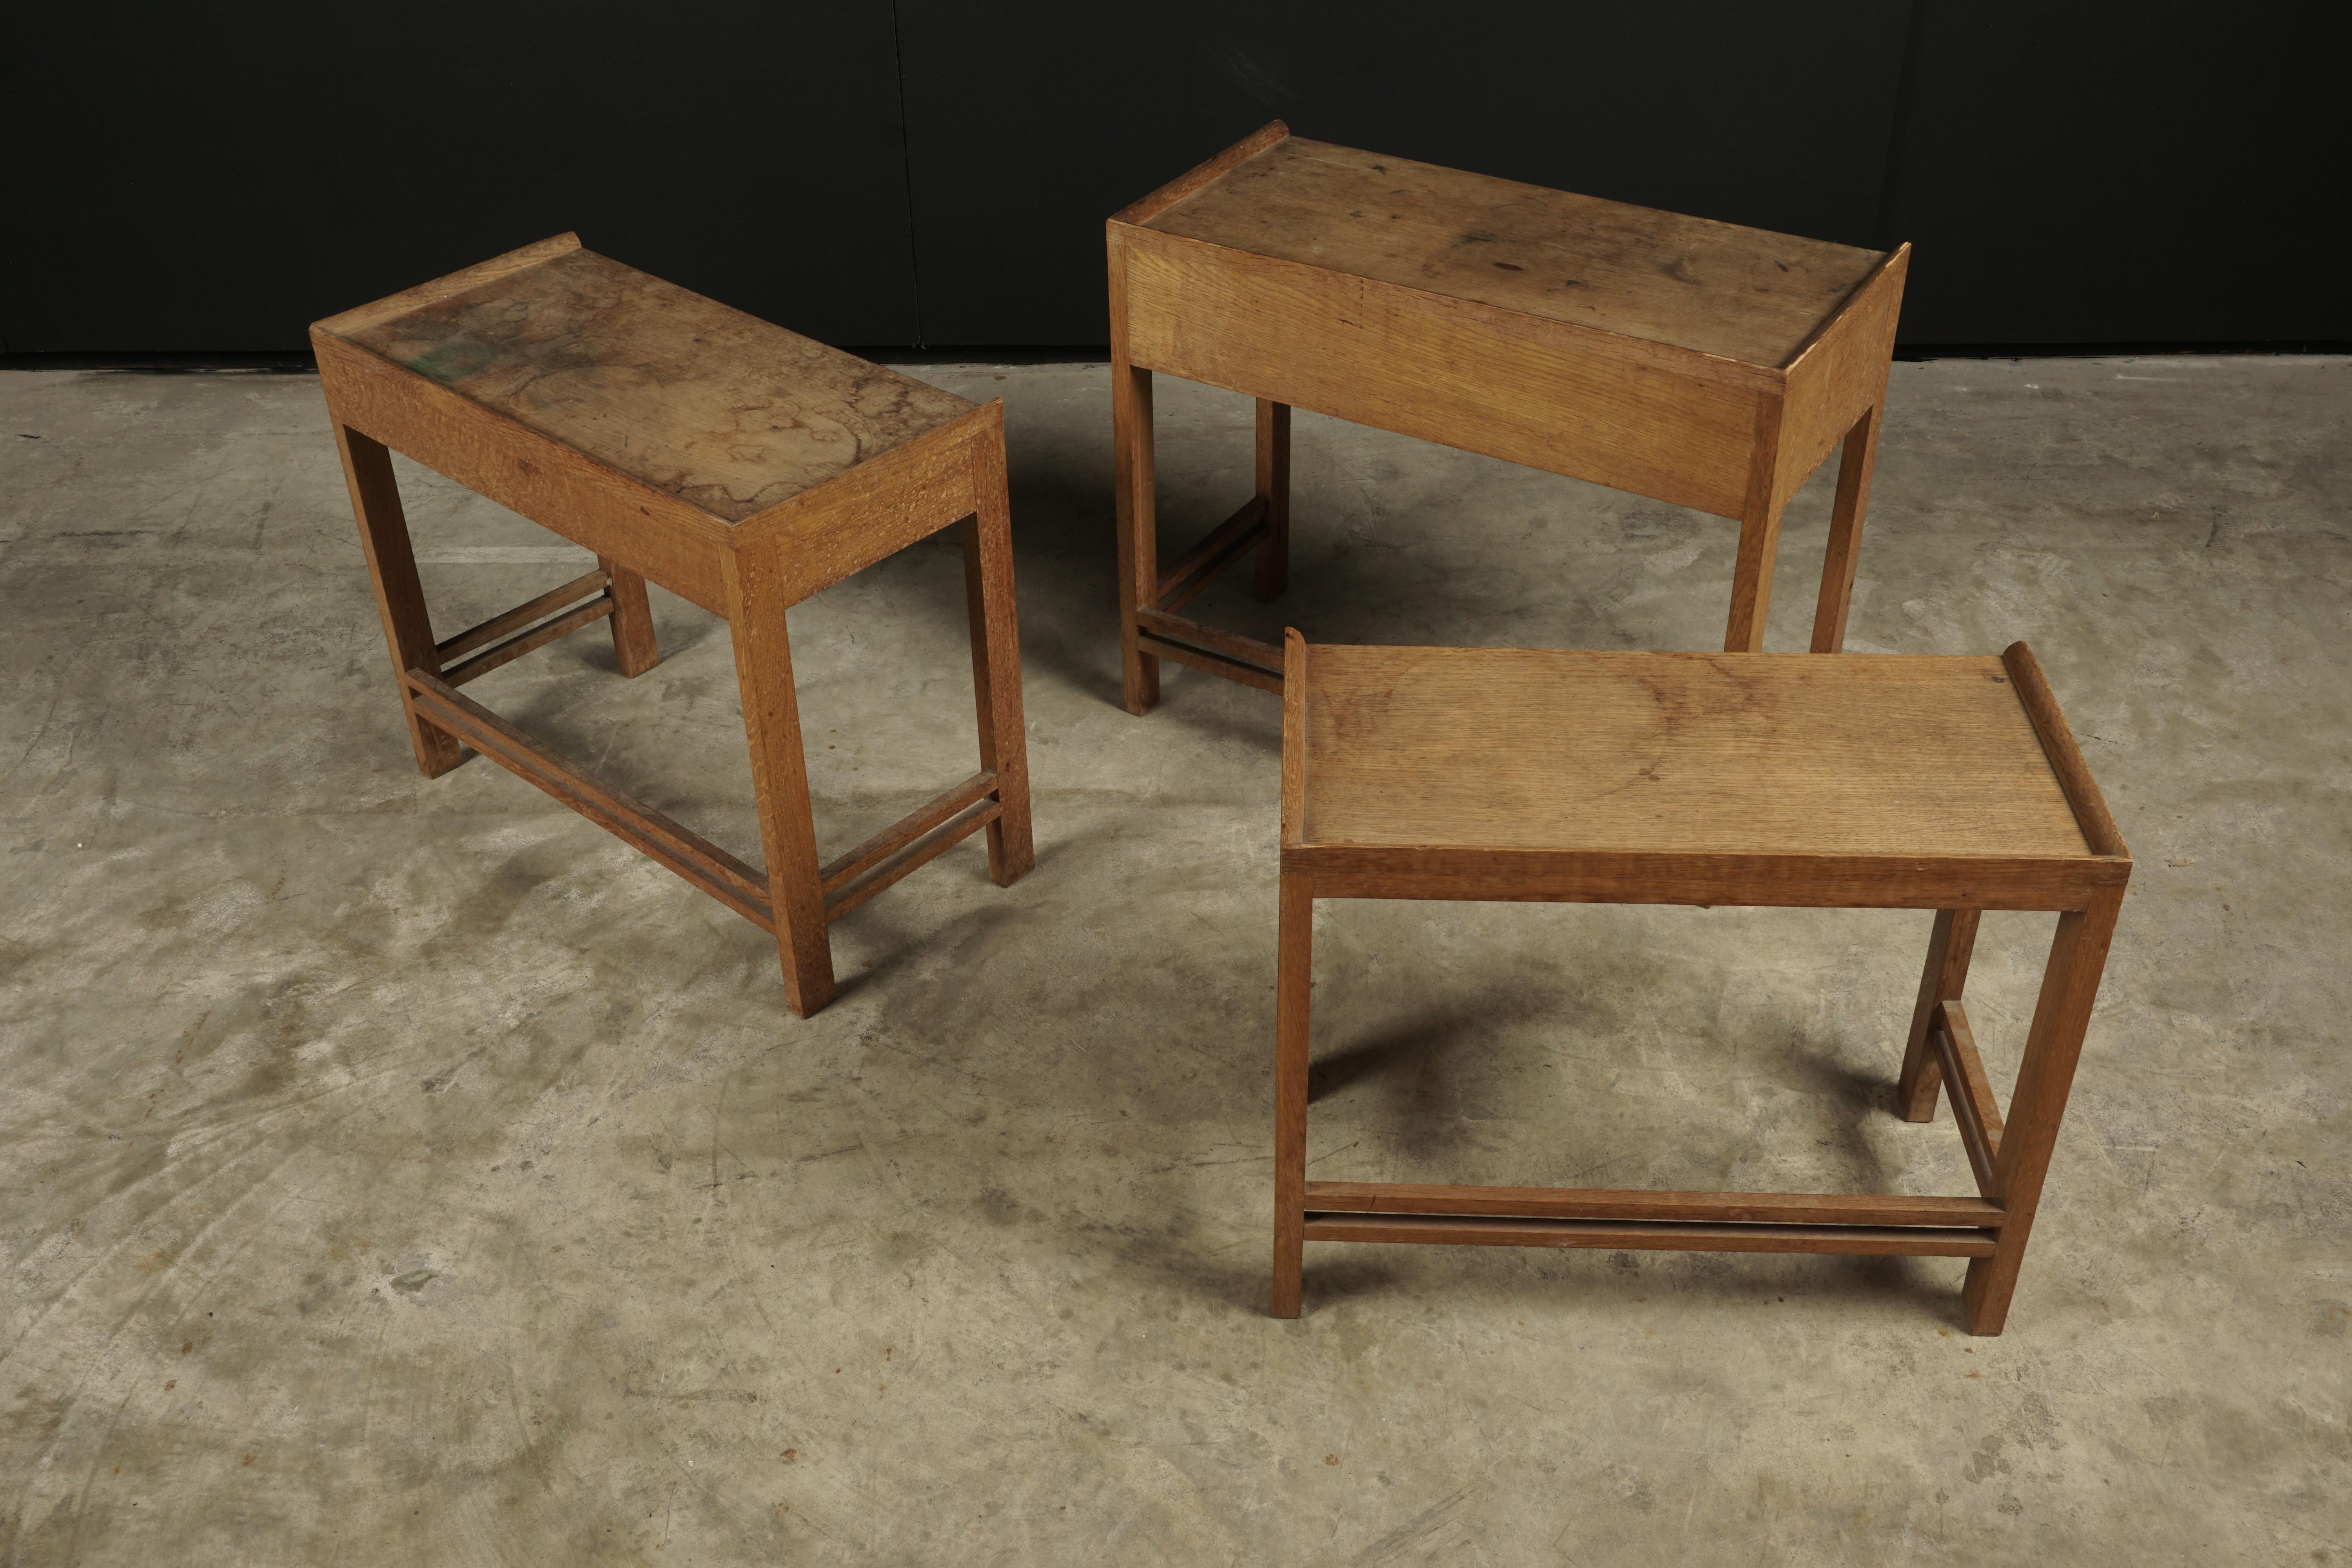 Oak Set of Three Midcentury Nesting Tables from France, circa 1950